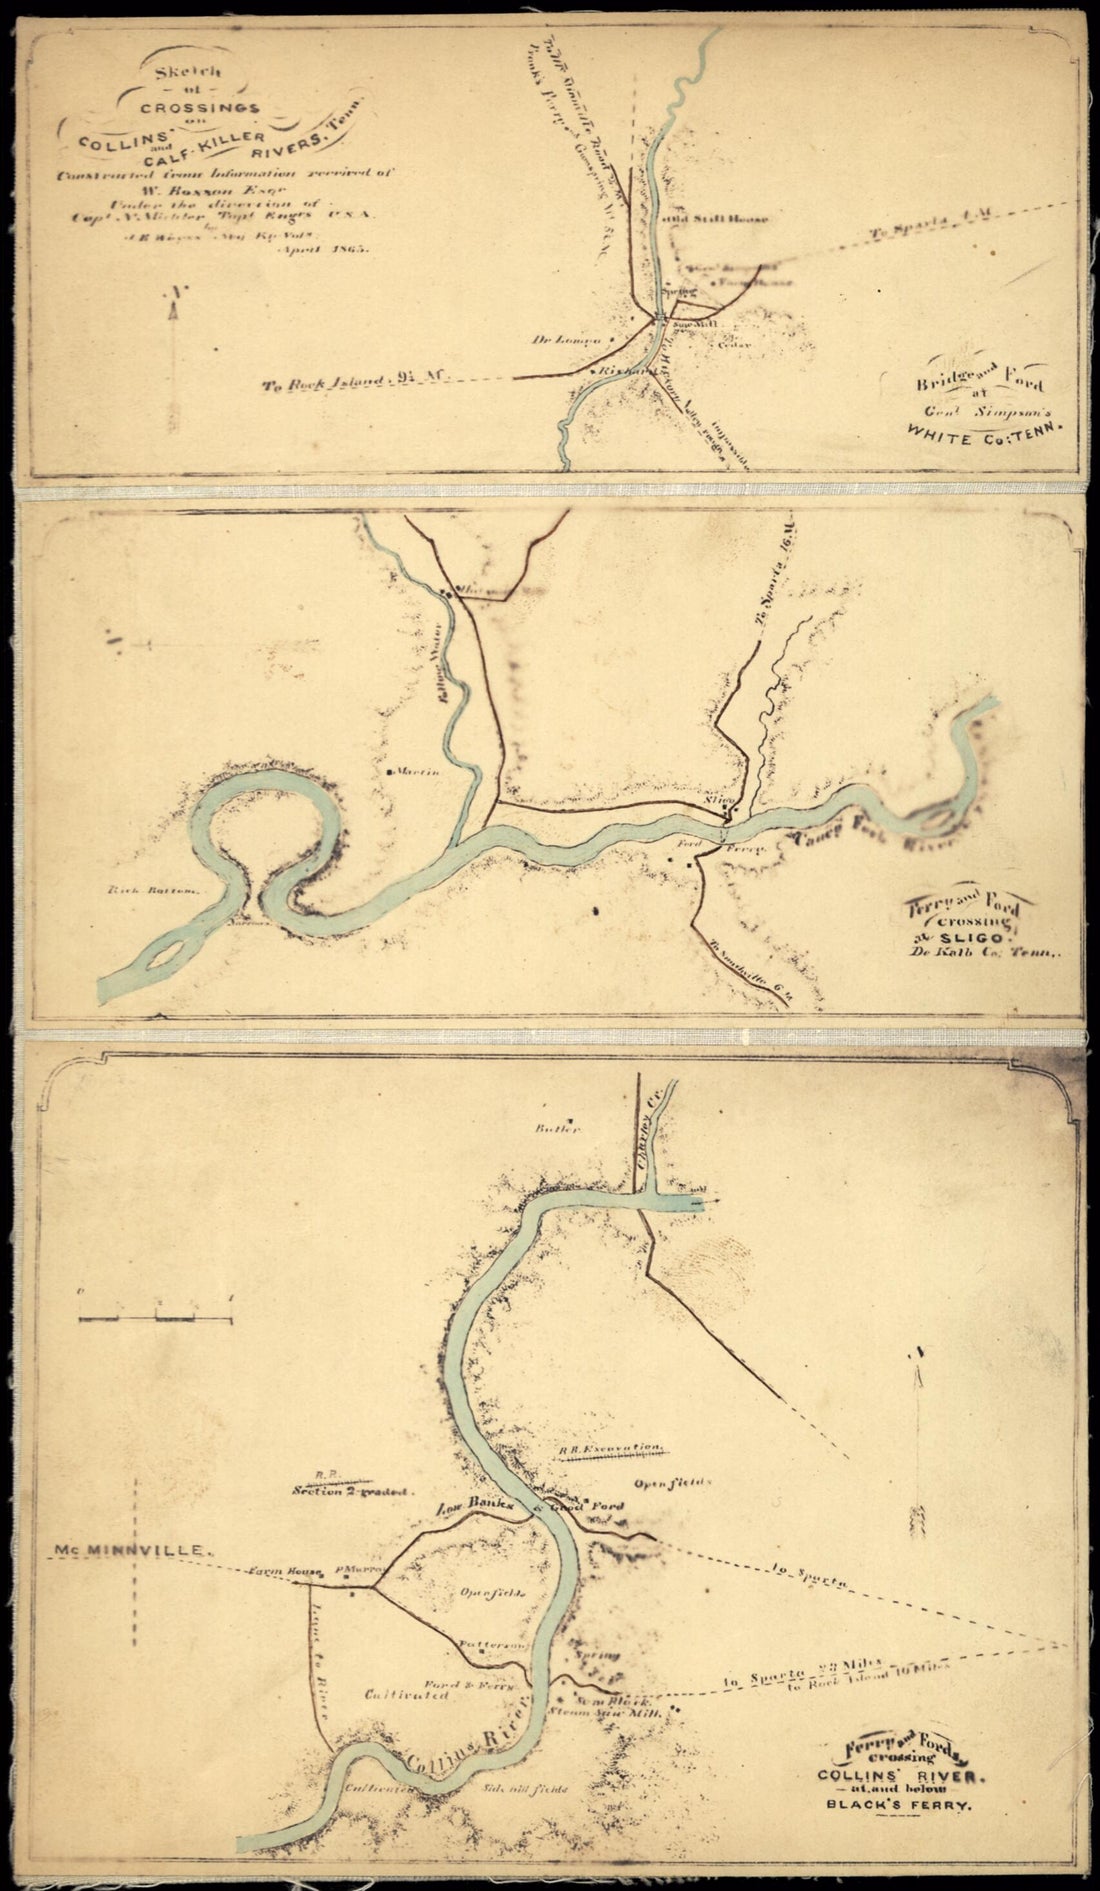 This old map of Killer Rivers, Tennessee from 1863 was created by N. (Nathaniel) Michler, J. E. Weyss in 1863